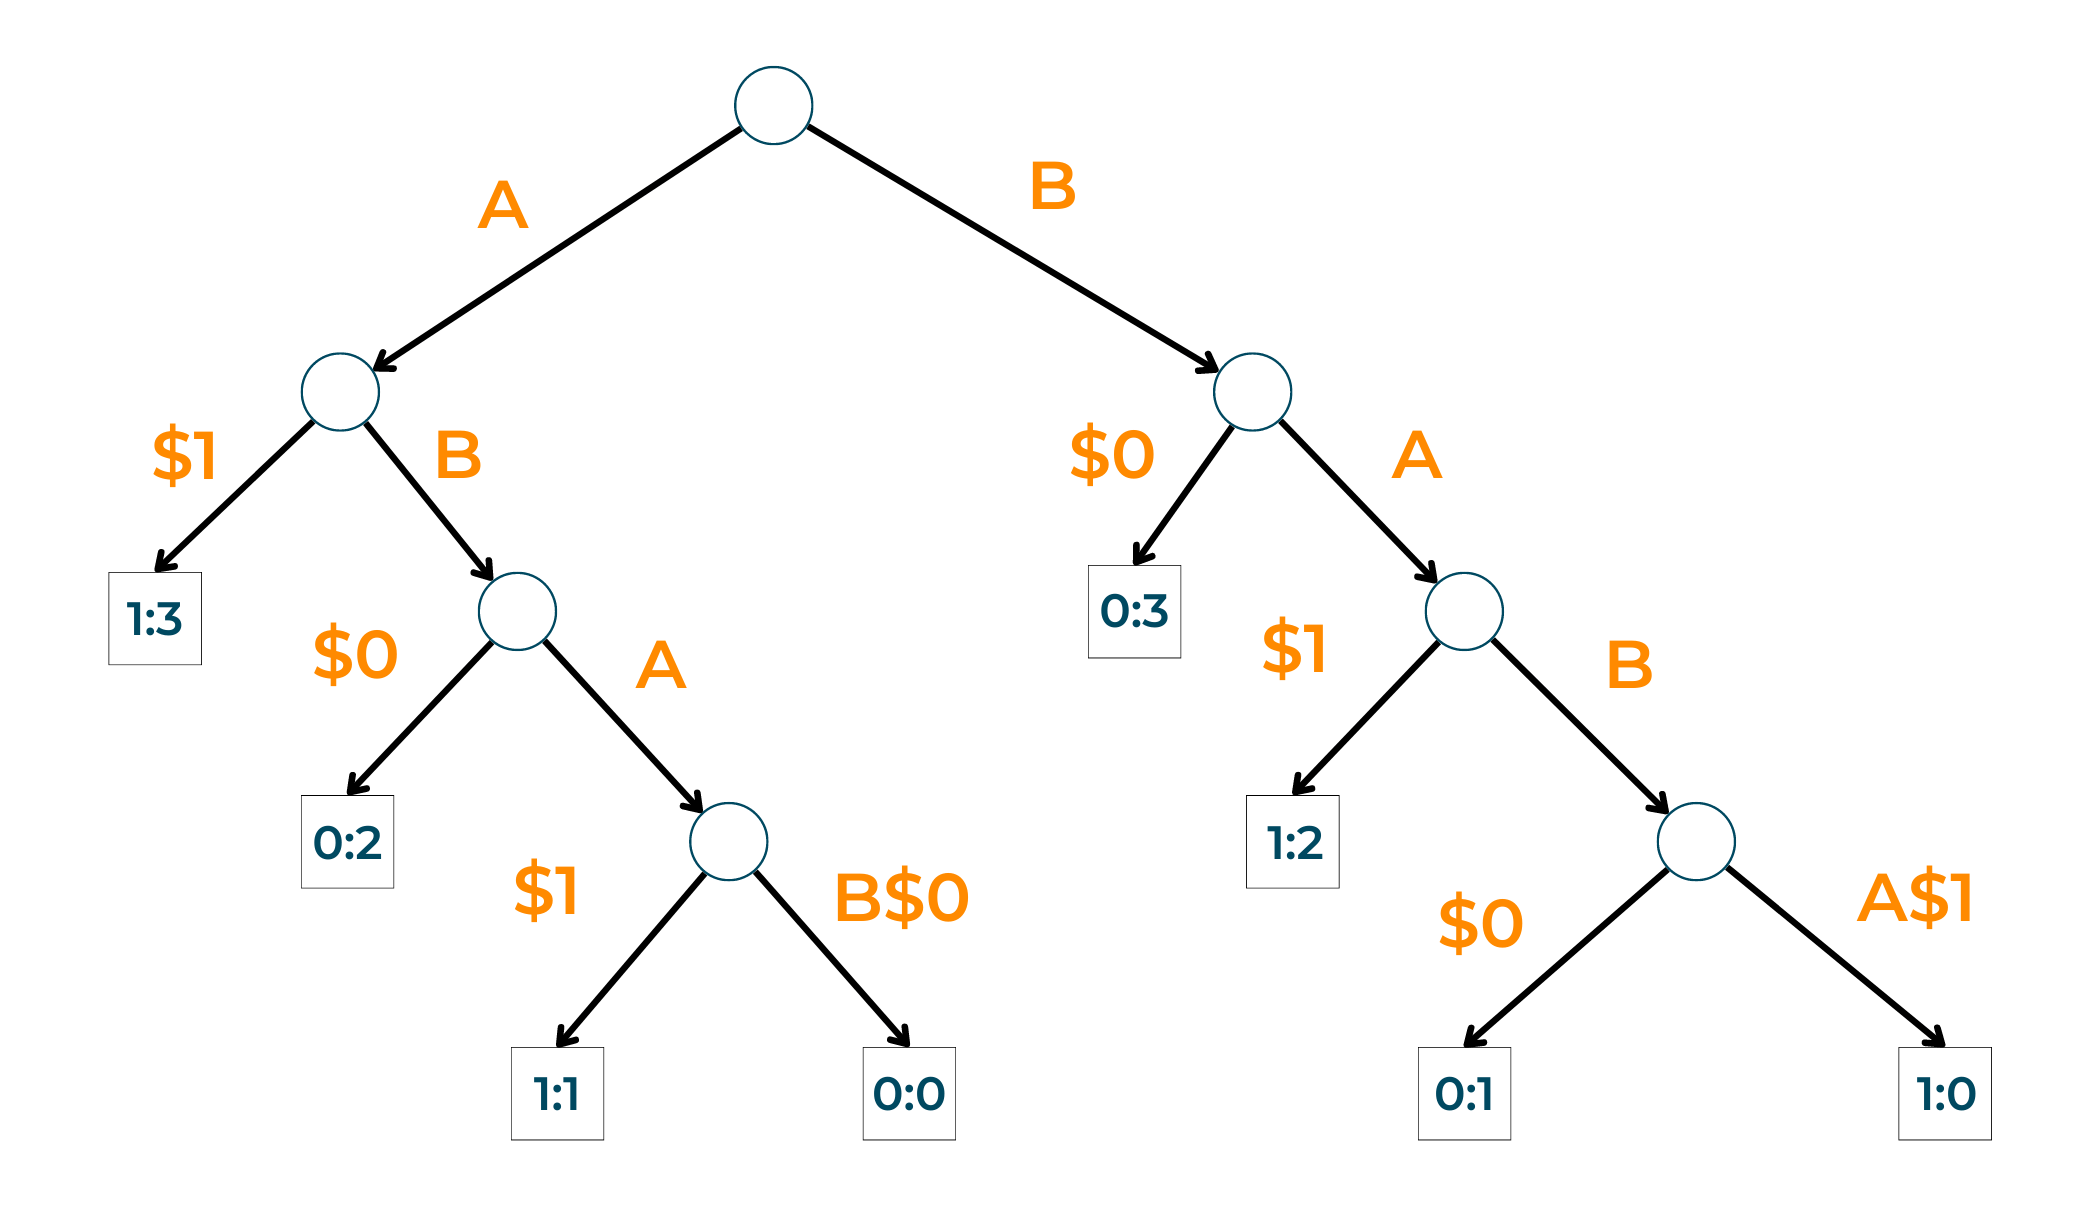 Generalized Suffix Trees